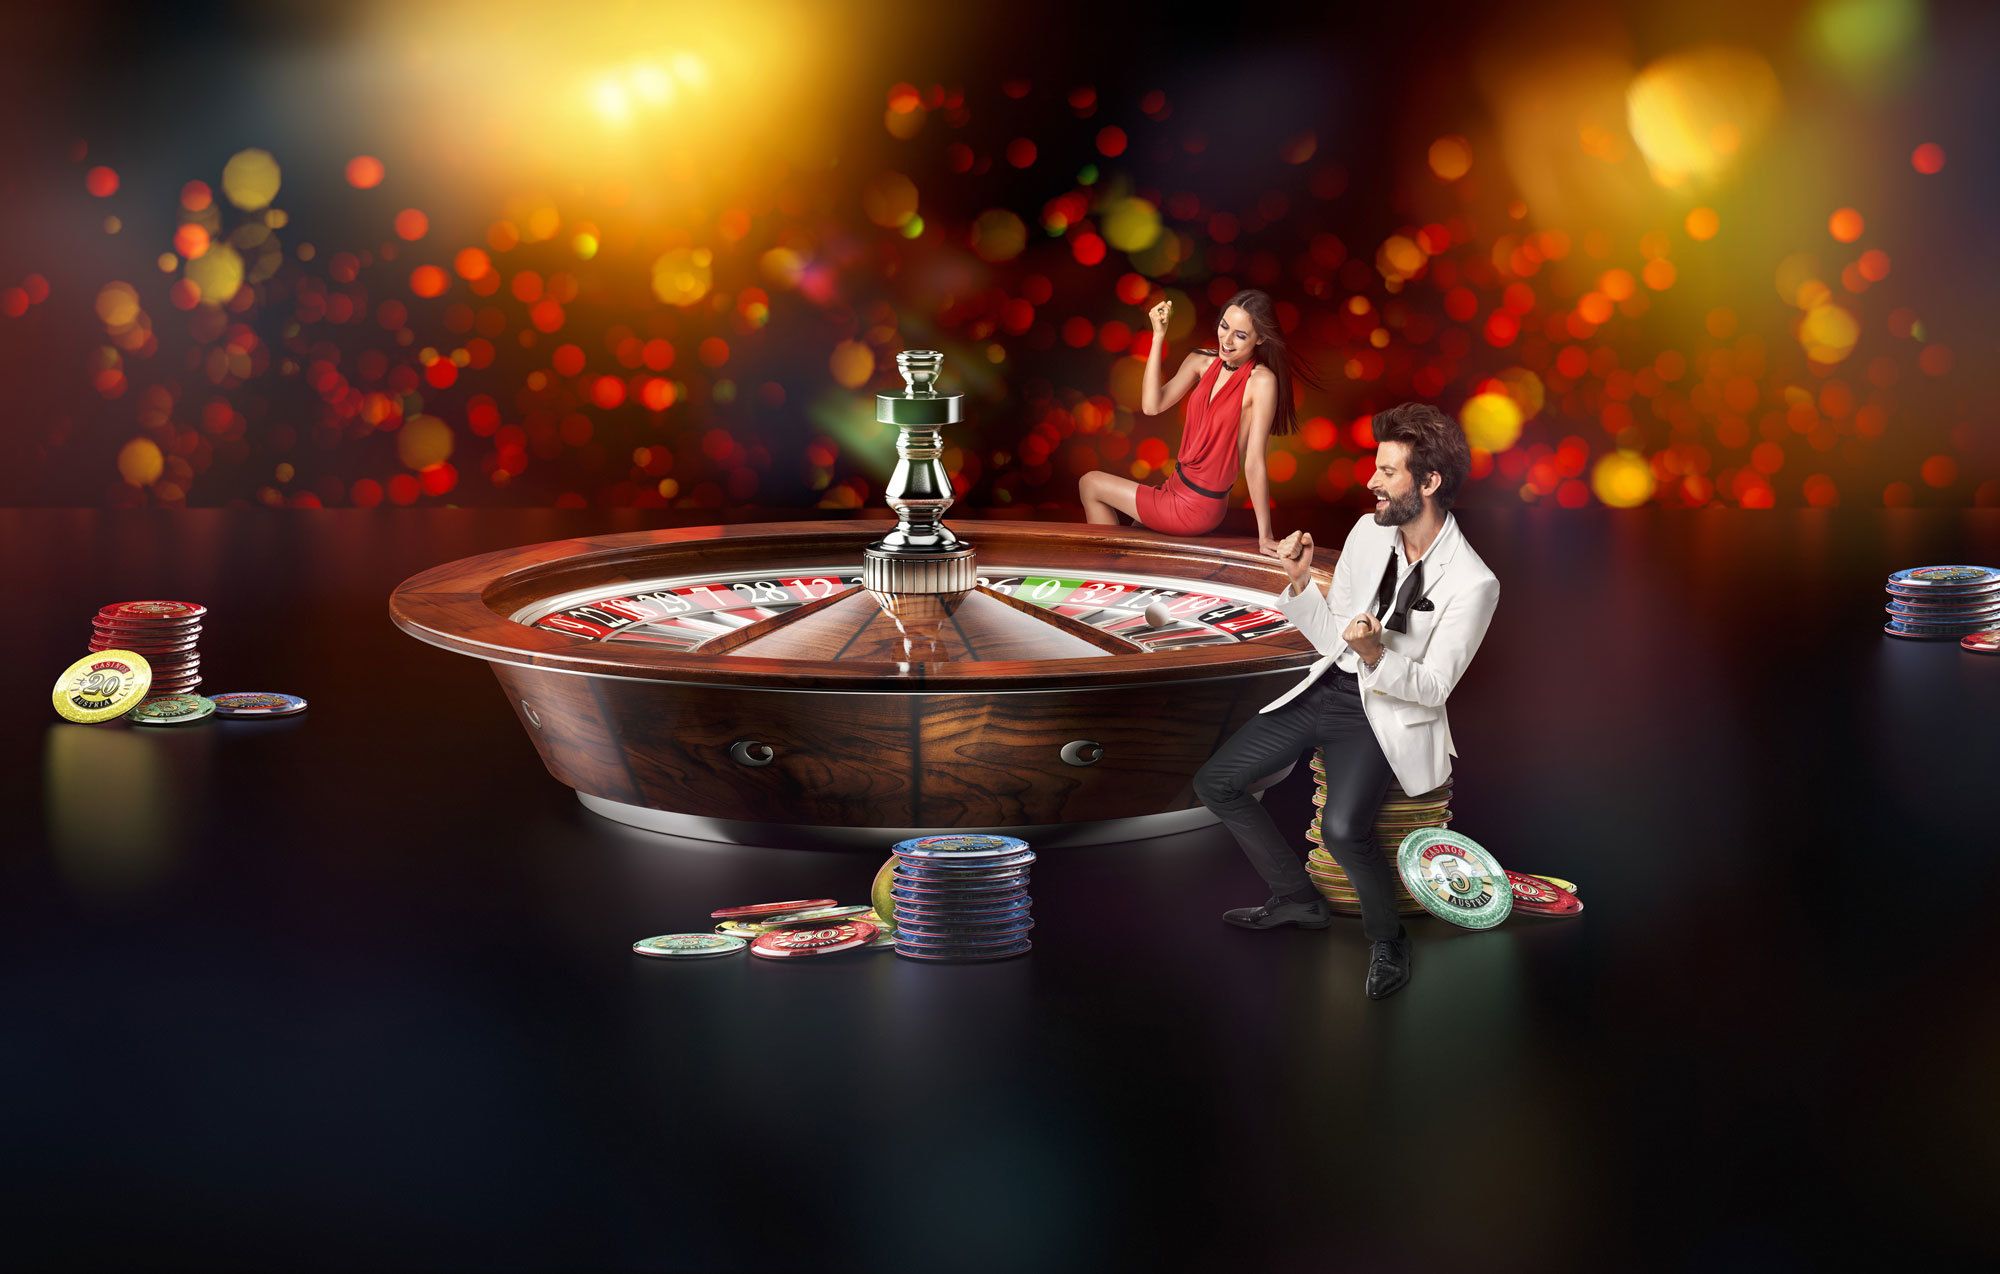 Casino Games- An Opportunity to Make Some Quick Money